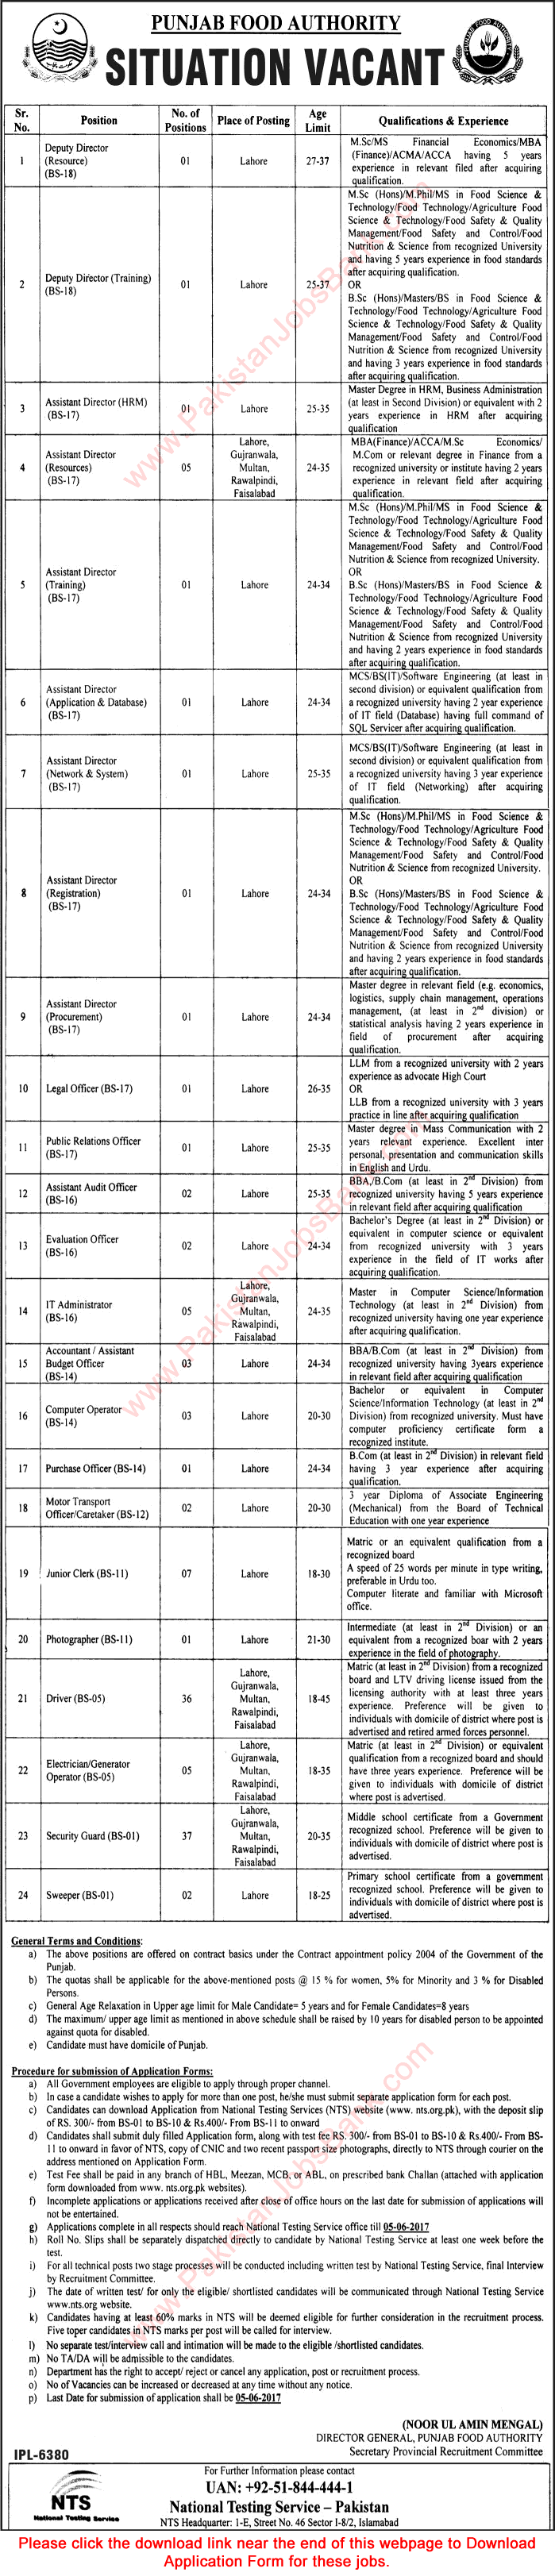 Punjab Food Authority Jobs May 2017 NTS Application Form Drivers, Security Guards, Clerks & Others Latest